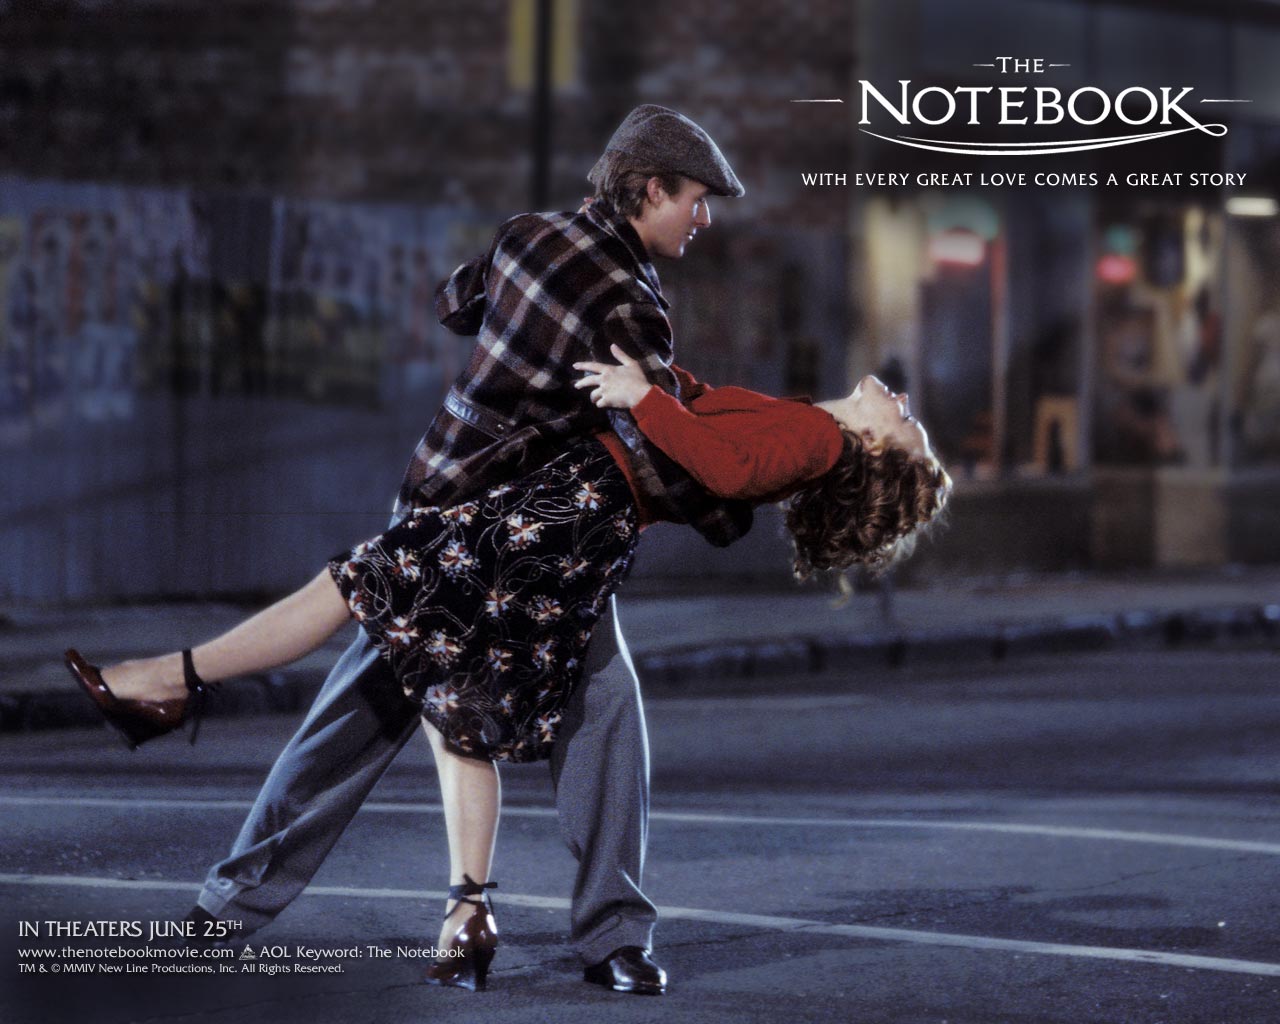 Free The Notebook Wallpaper The Free The Notebook Wallpaper Free, Free Wallpaper, Play Free Games and Send Free eCards